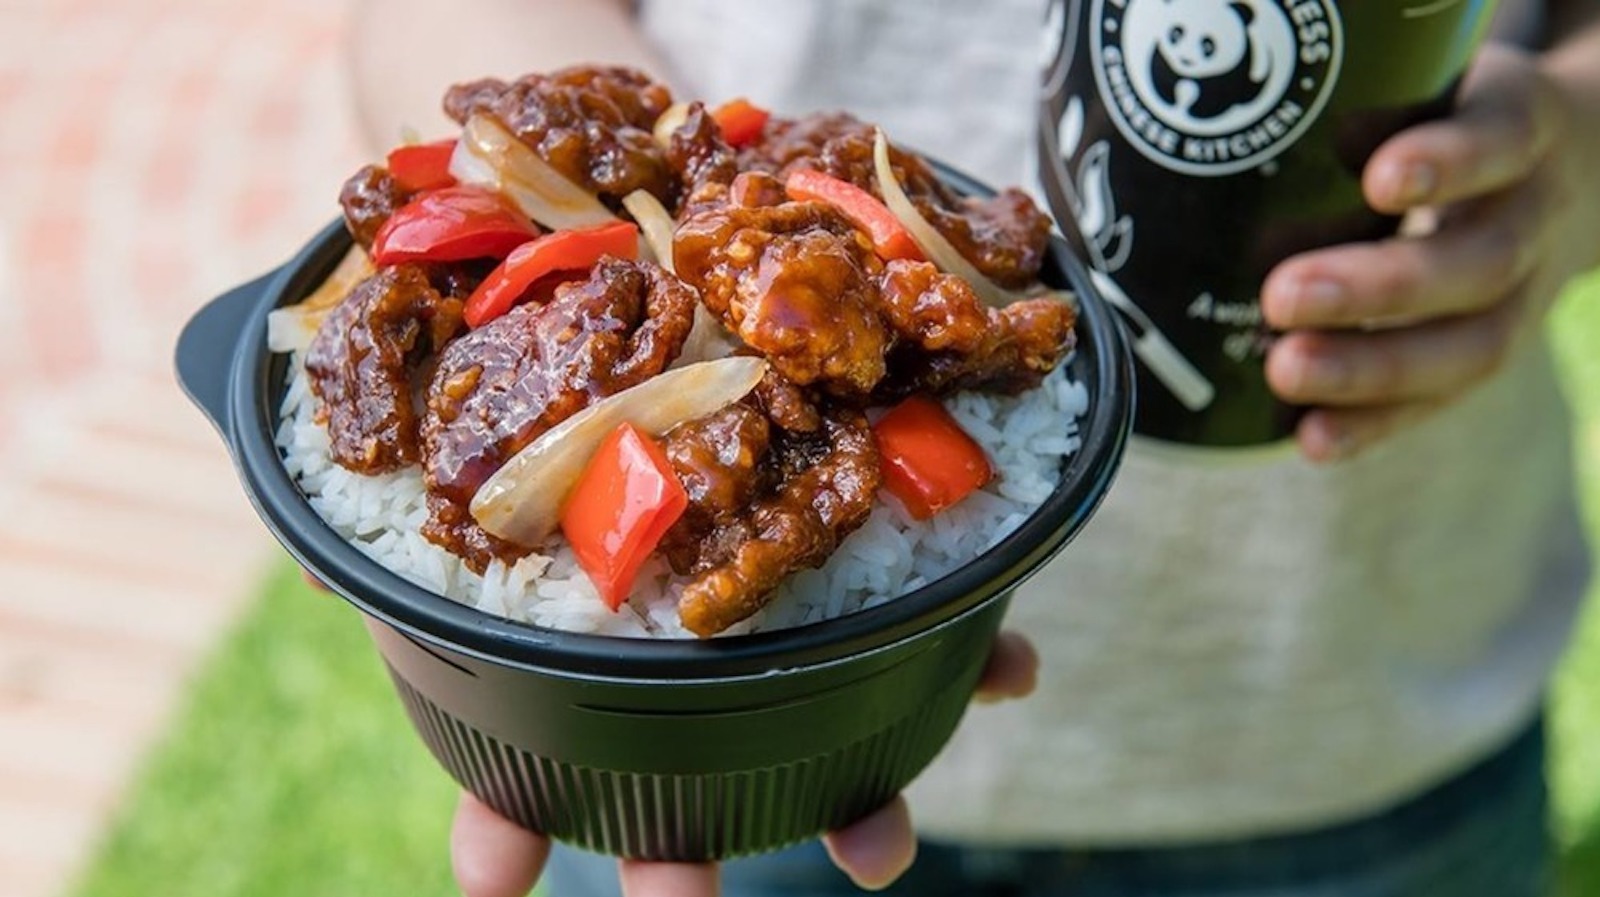 Panda Express Beijing Beef: What To Know Before Ordering